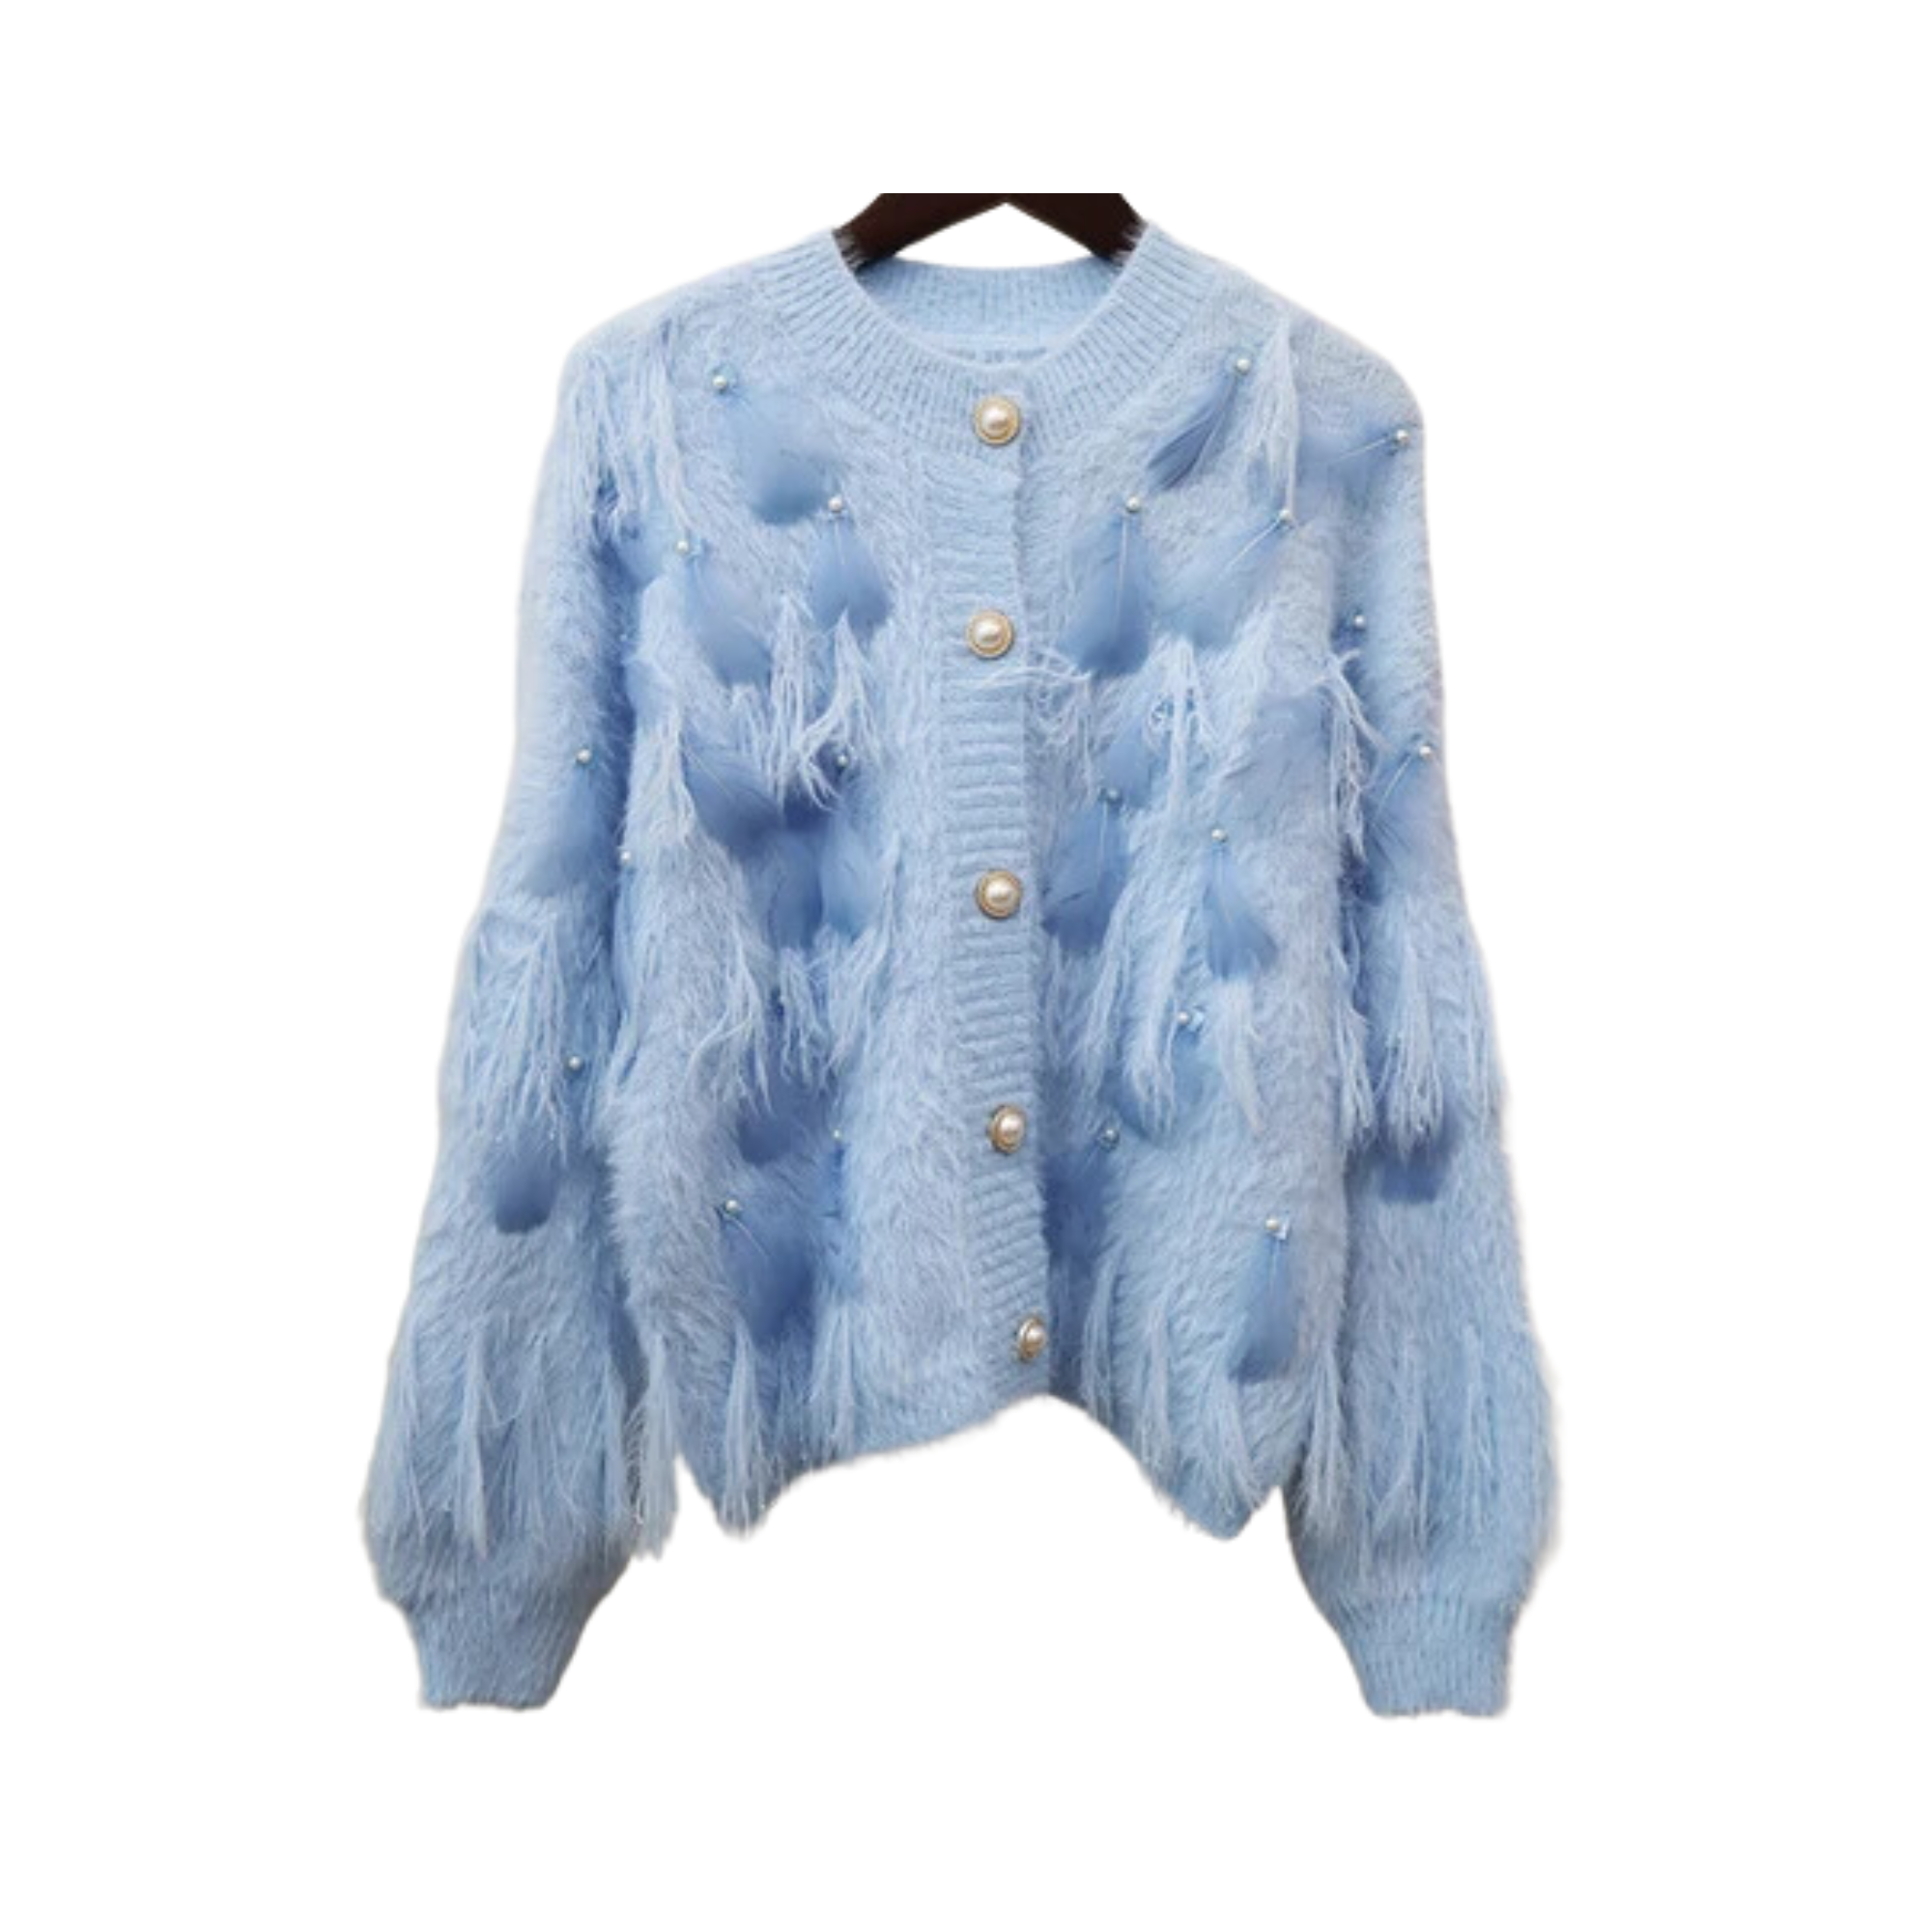 Knitted O-Neck Tassel Feathered Cardigan - Pre Order: Ships Feb 29